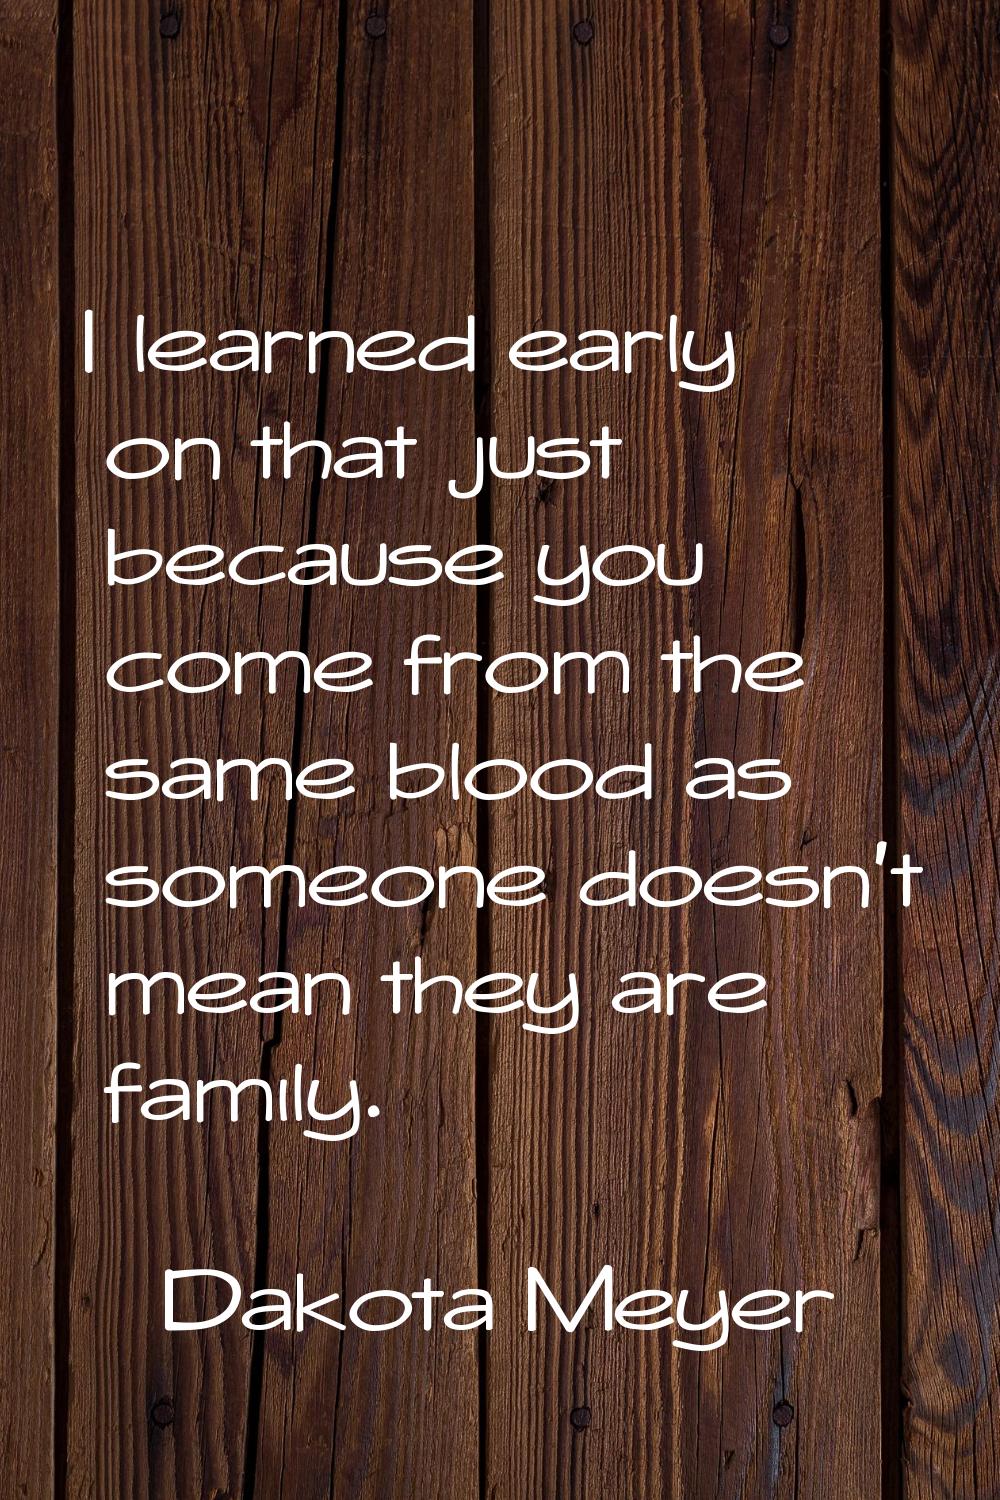 I learned early on that just because you come from the same blood as someone doesn't mean they are 